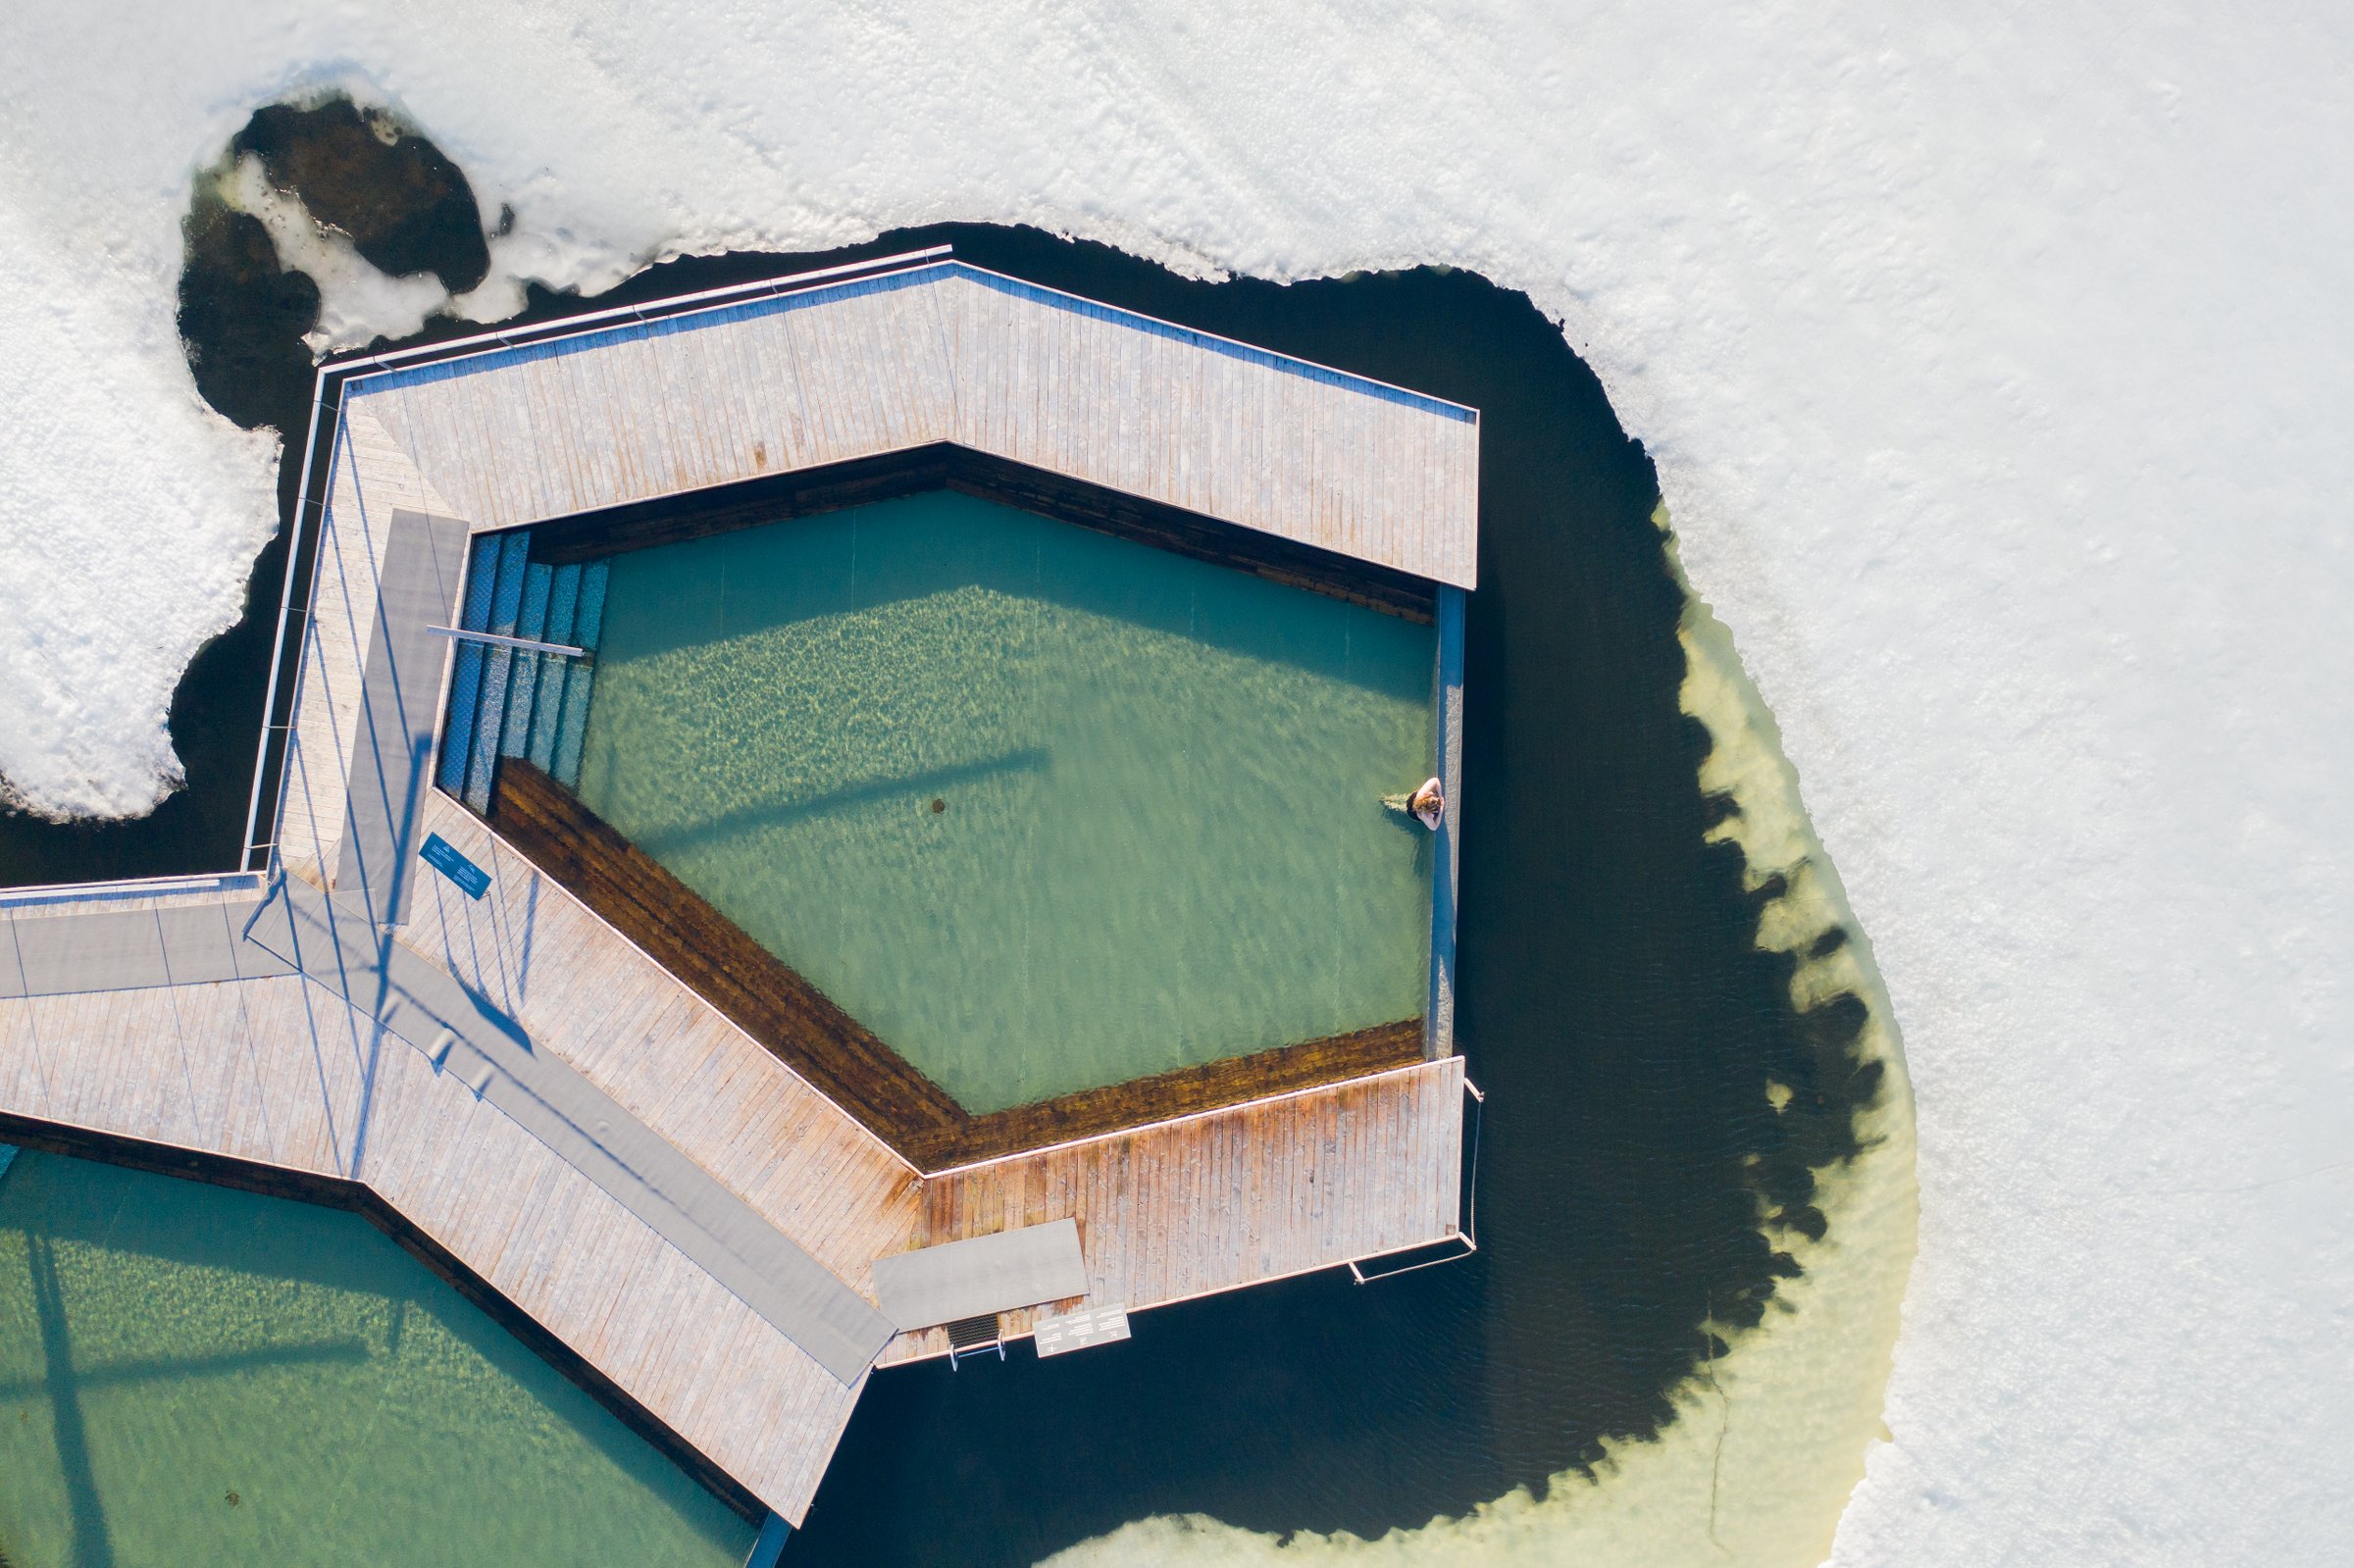 Aerial view of one pool at Vök baths in a frozen lake